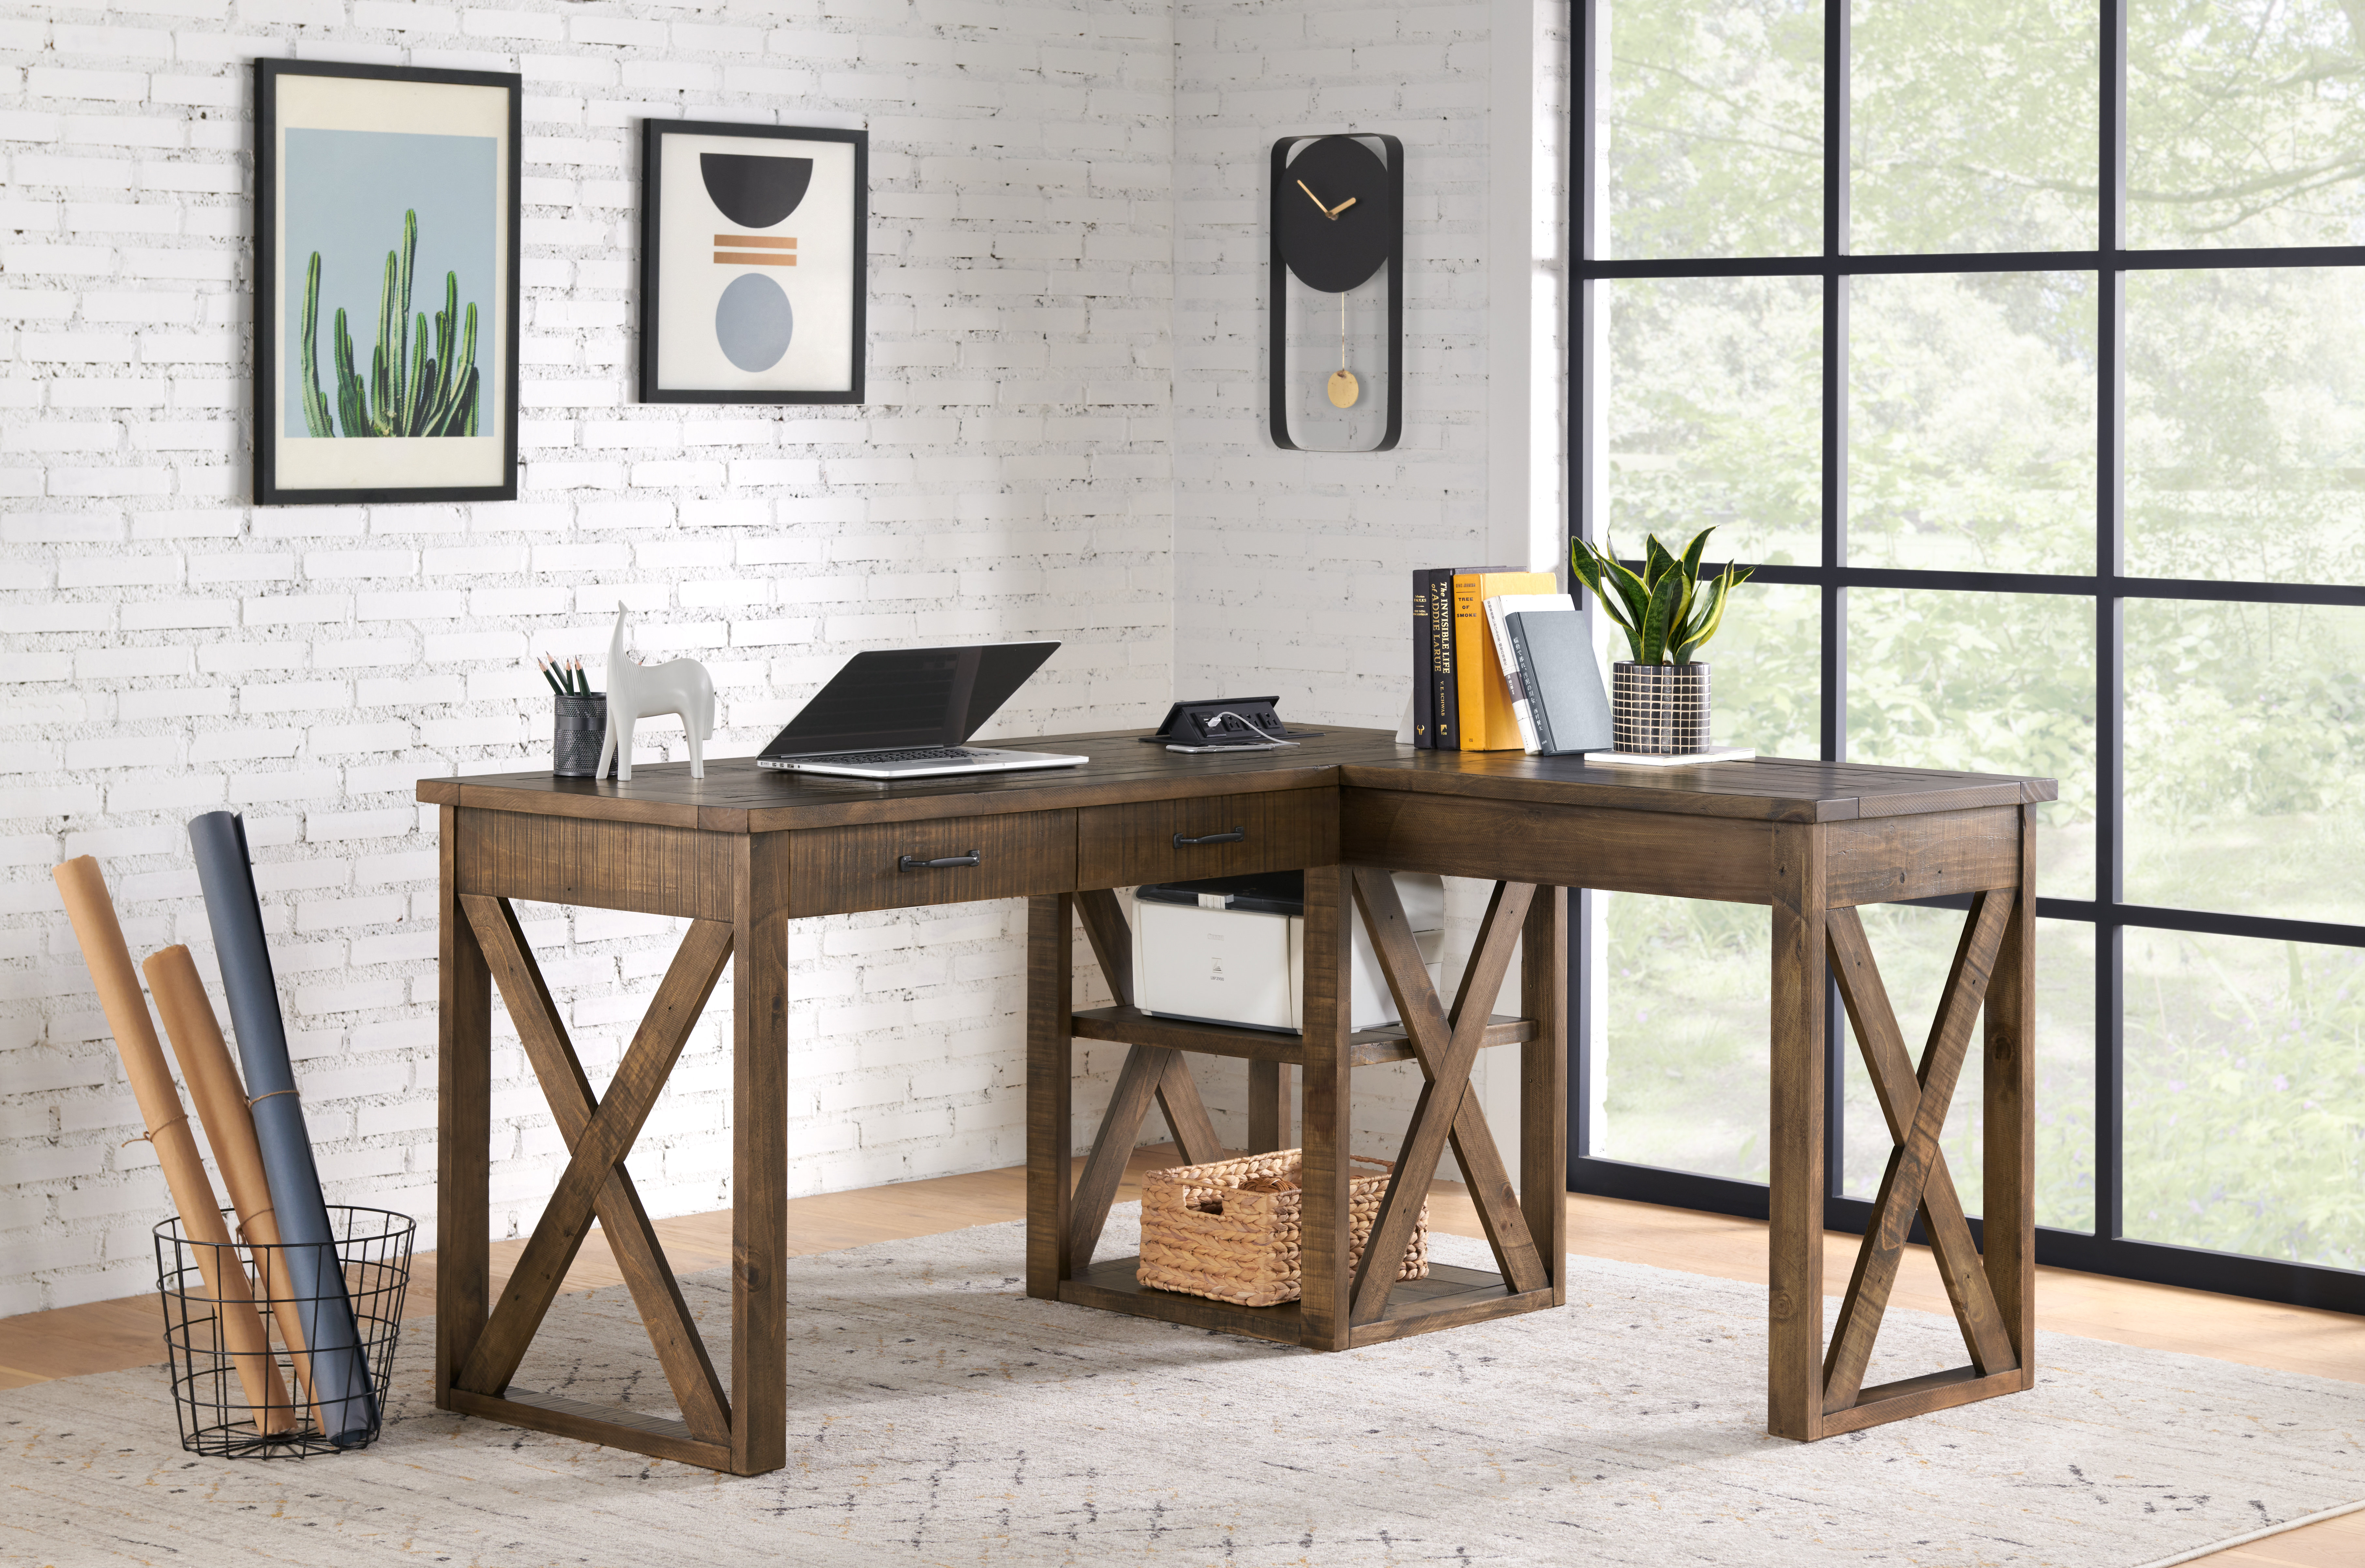 Buy Nexora L shape Modular Office Table with Three Drawers (Exotic